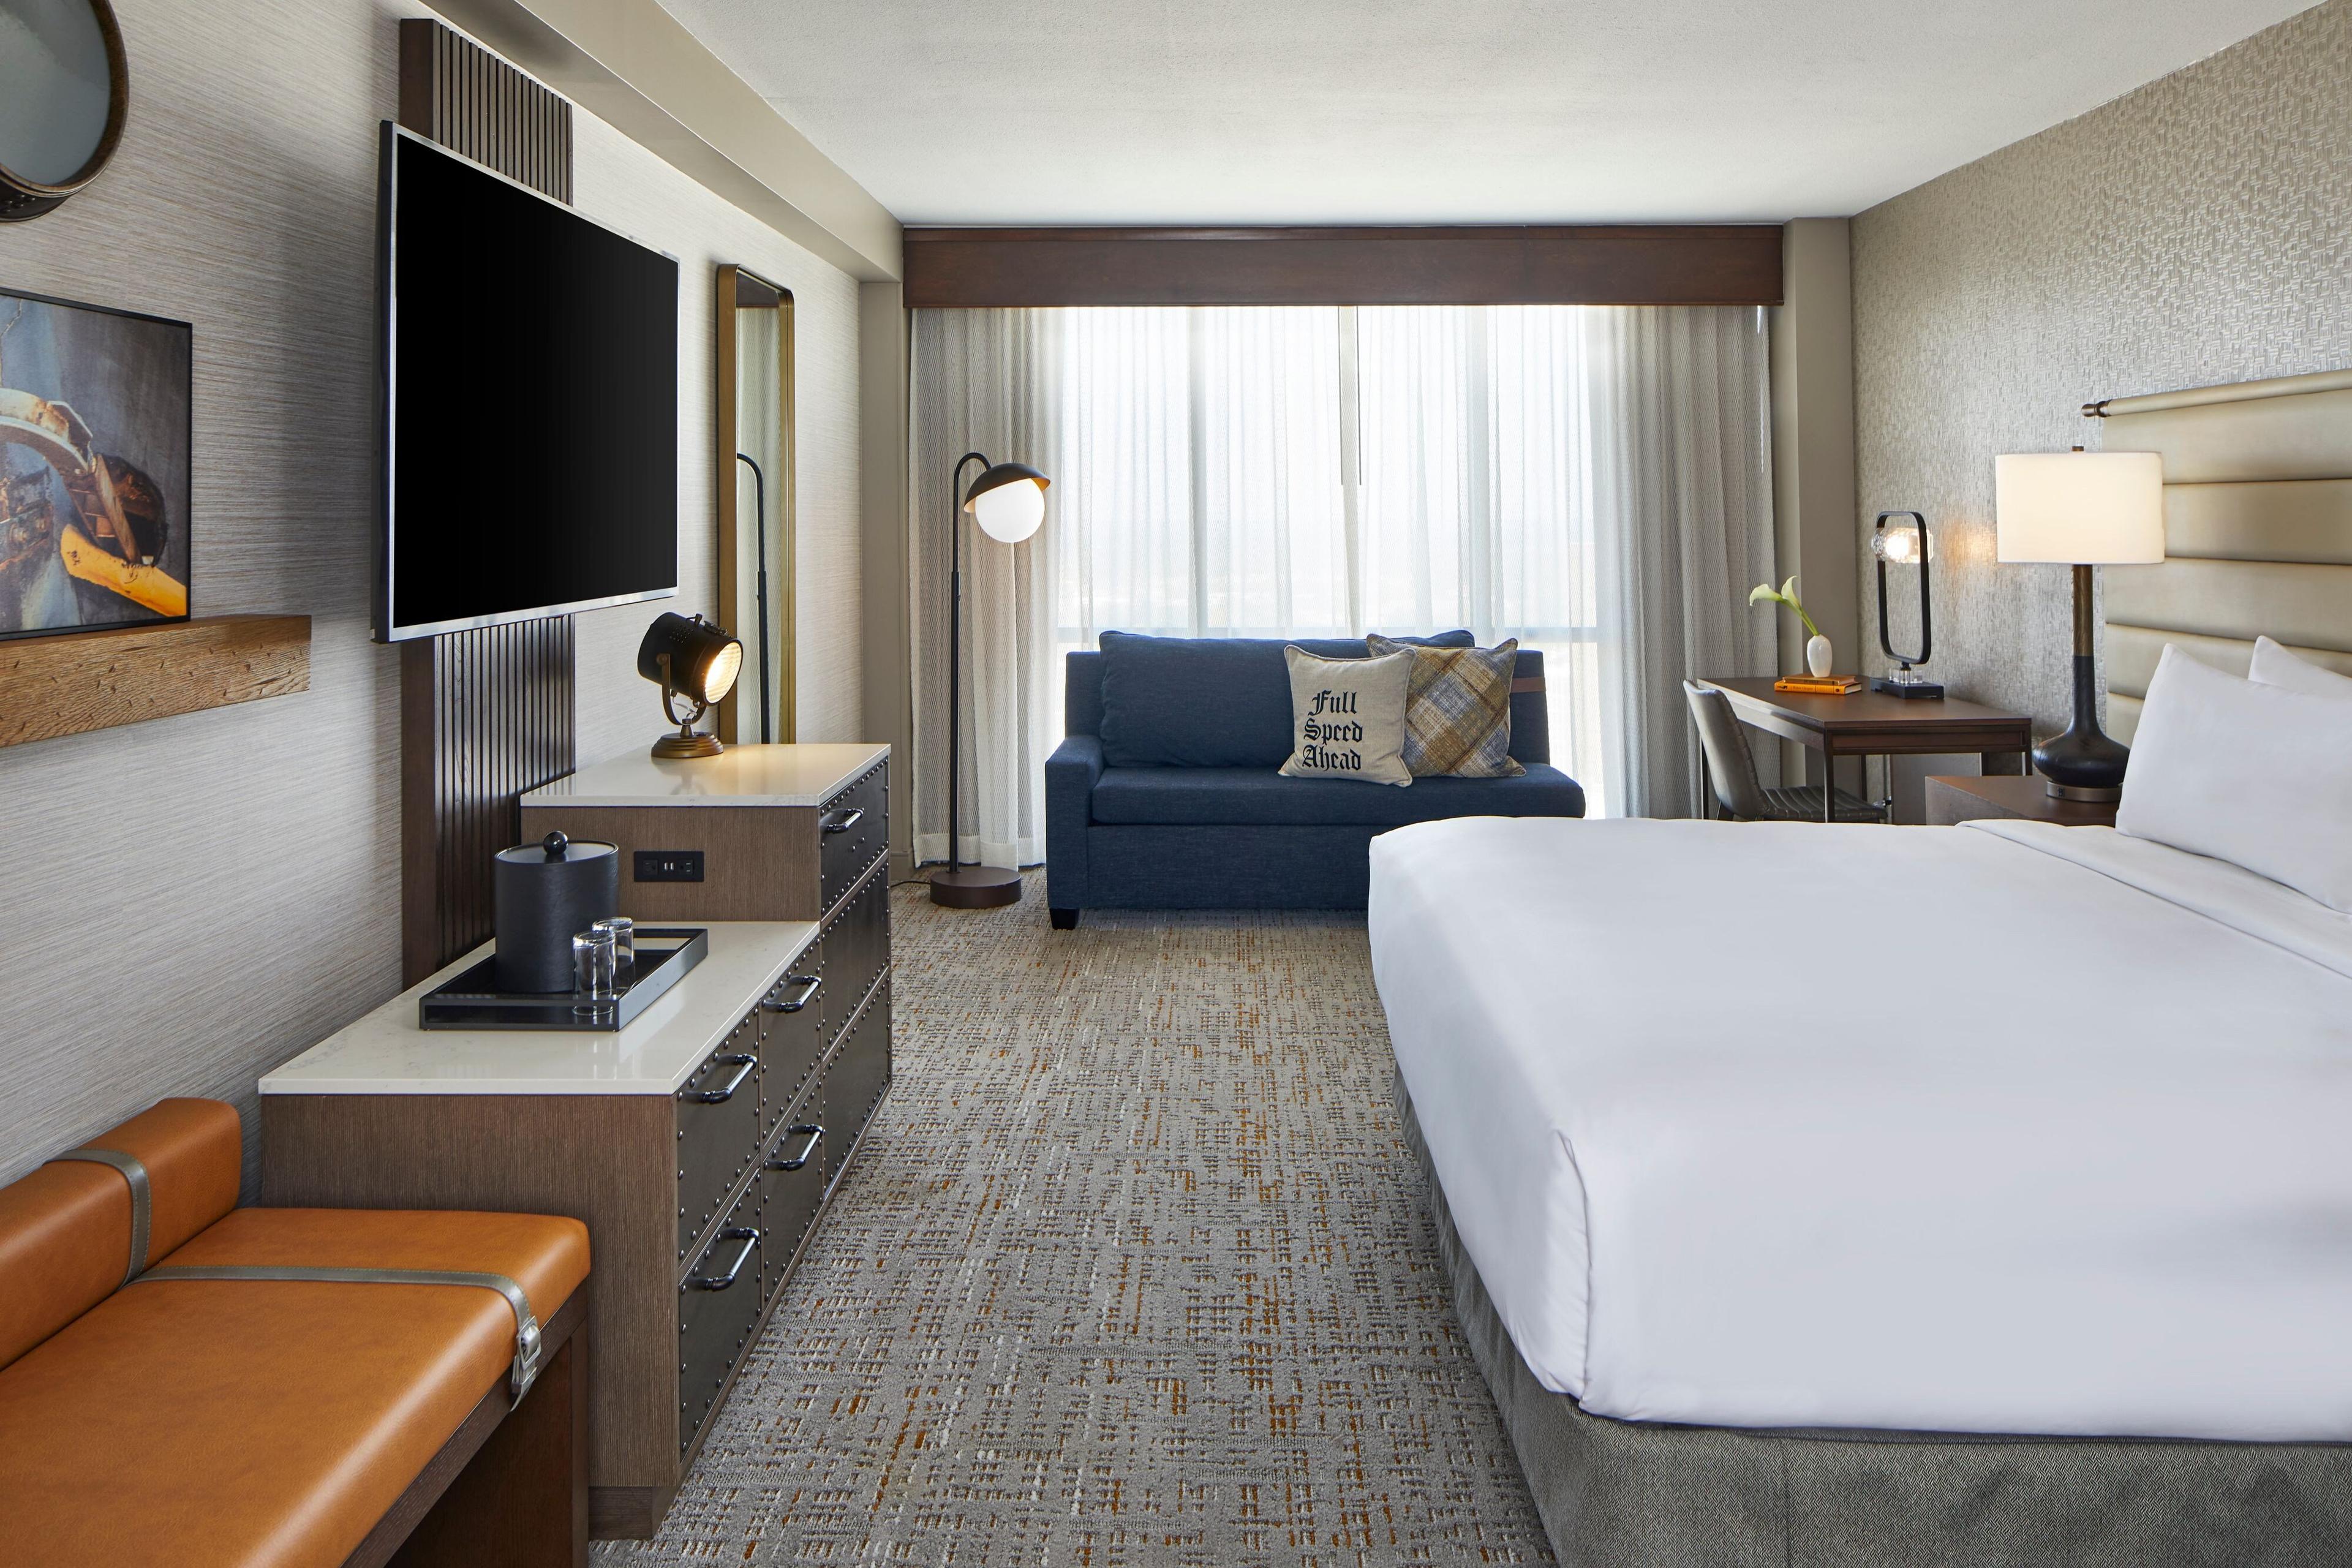 From the plush bedding to the thoughtful amenities, our king rooms are designed to pamper you during your stay.